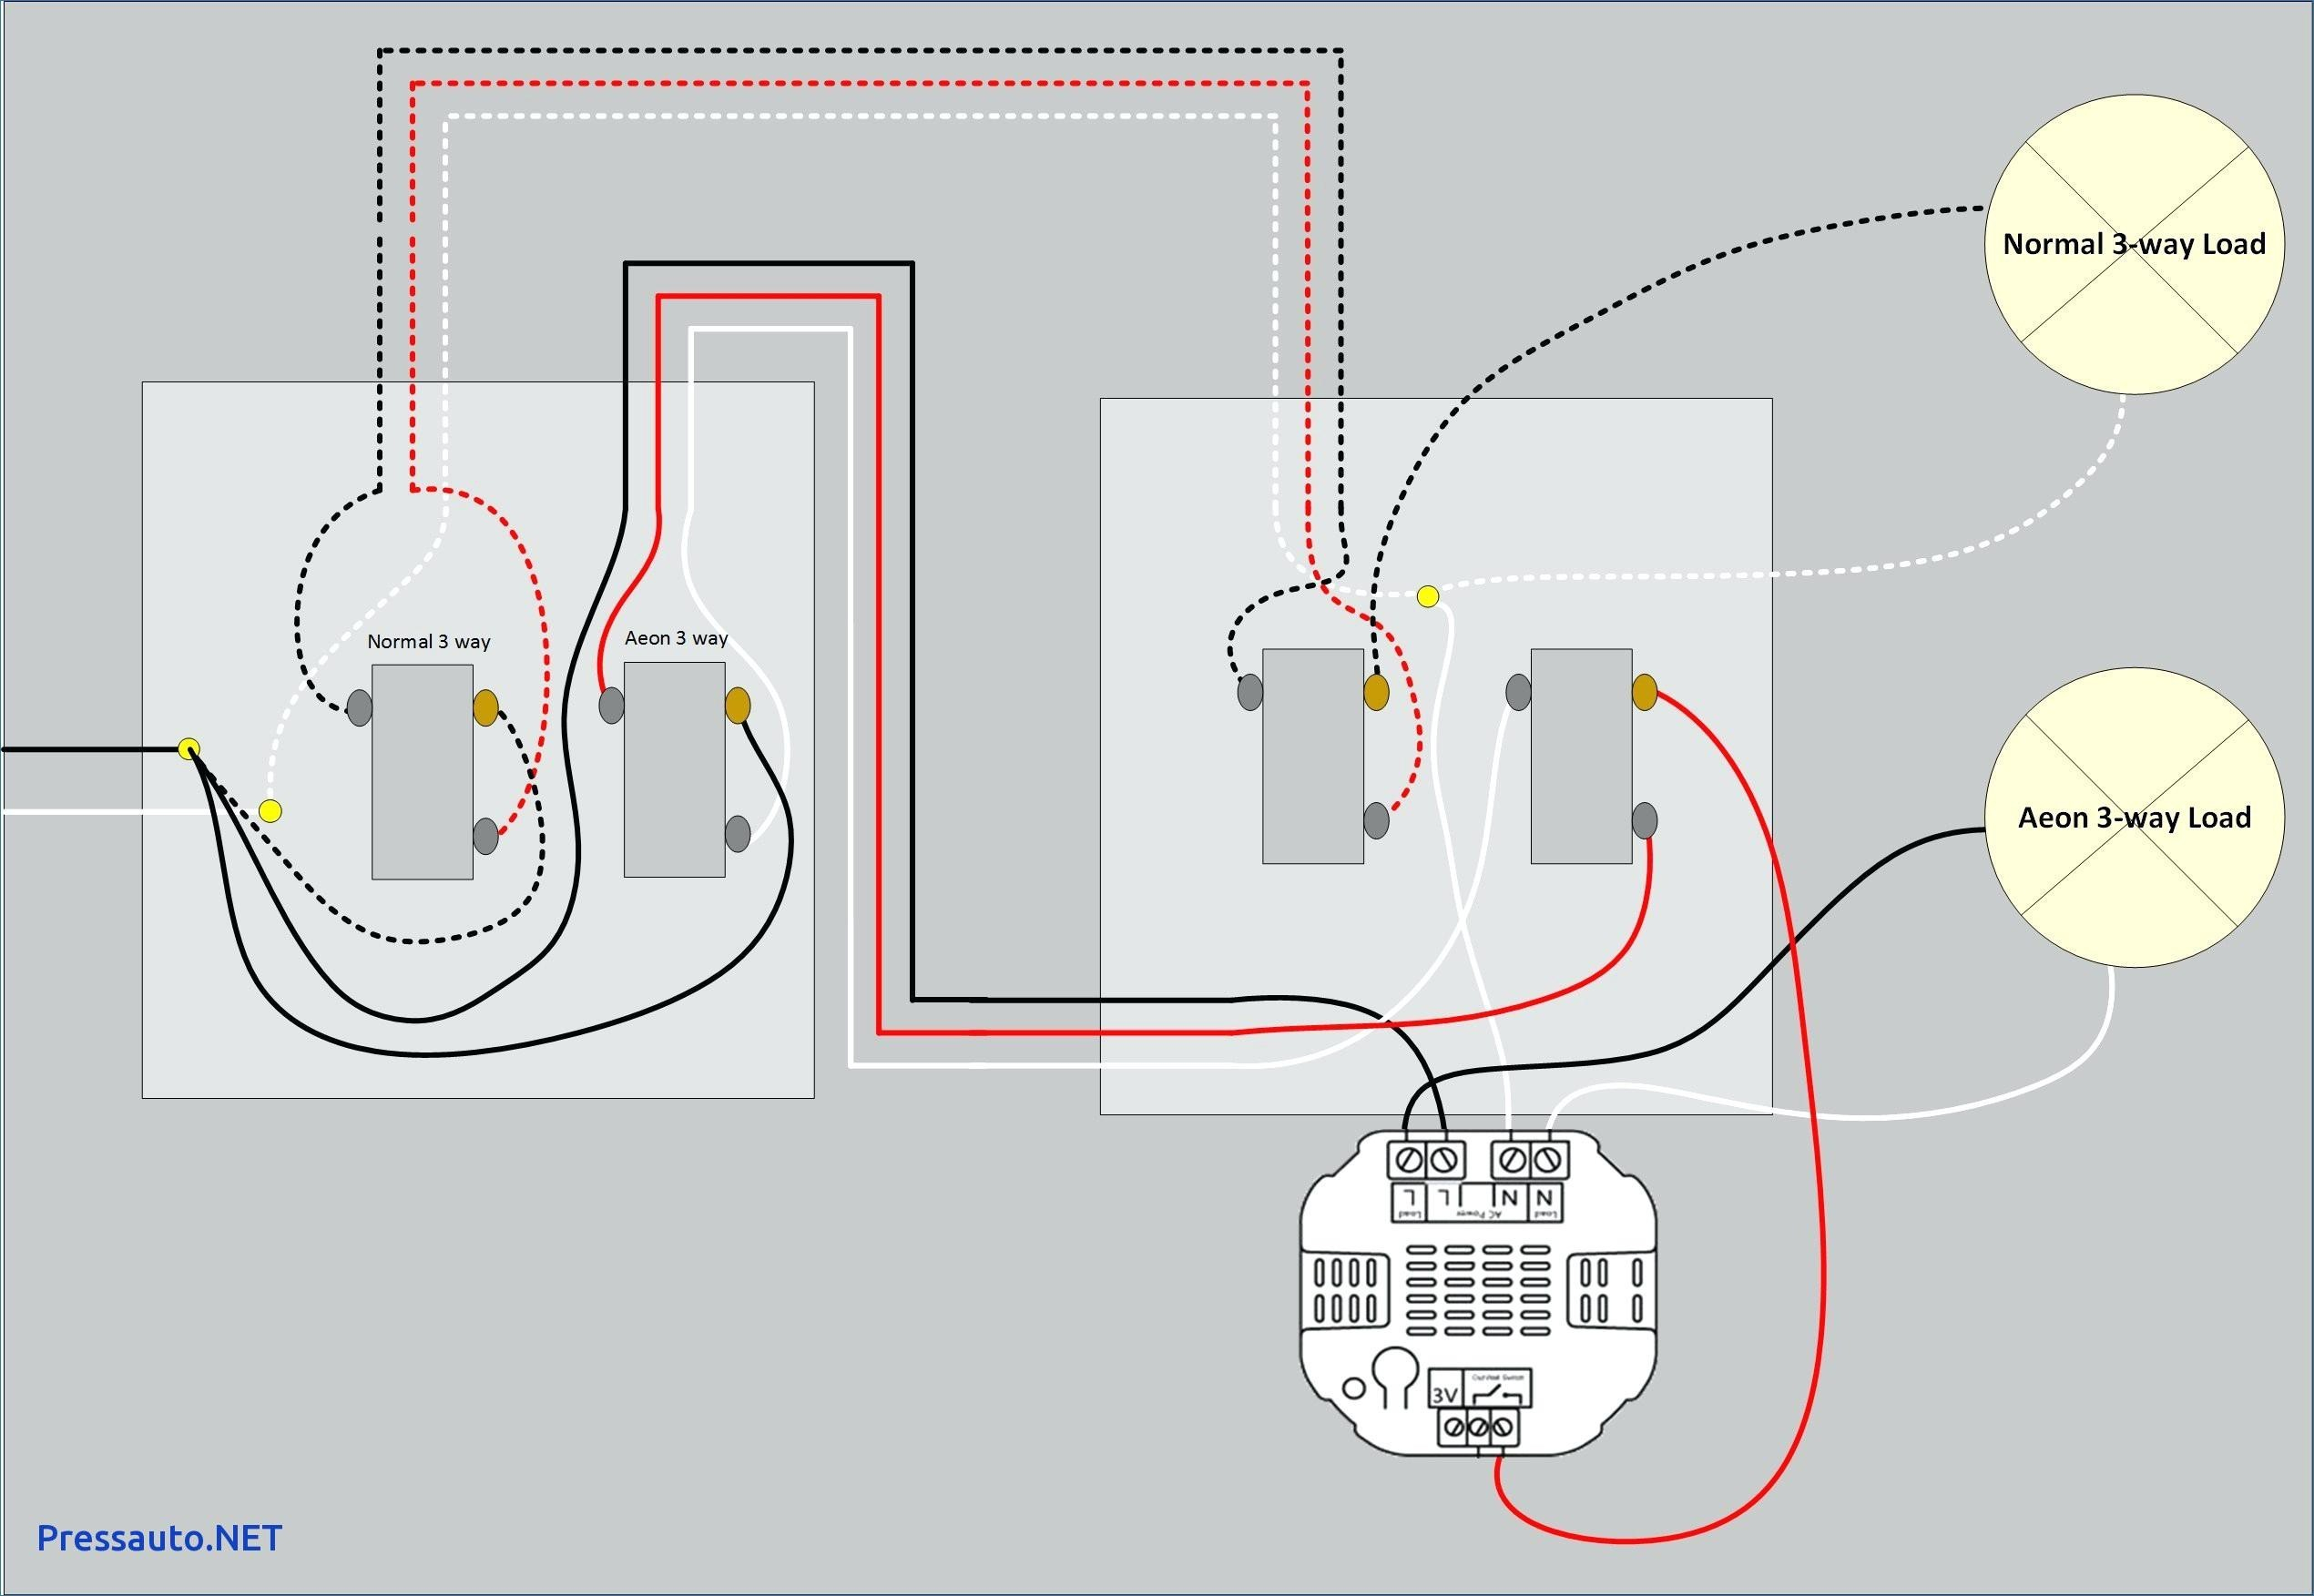 4Way Switch Wiring Diagram Way And 4 Way Switch Wiring For Residential Lighting Tom Remus